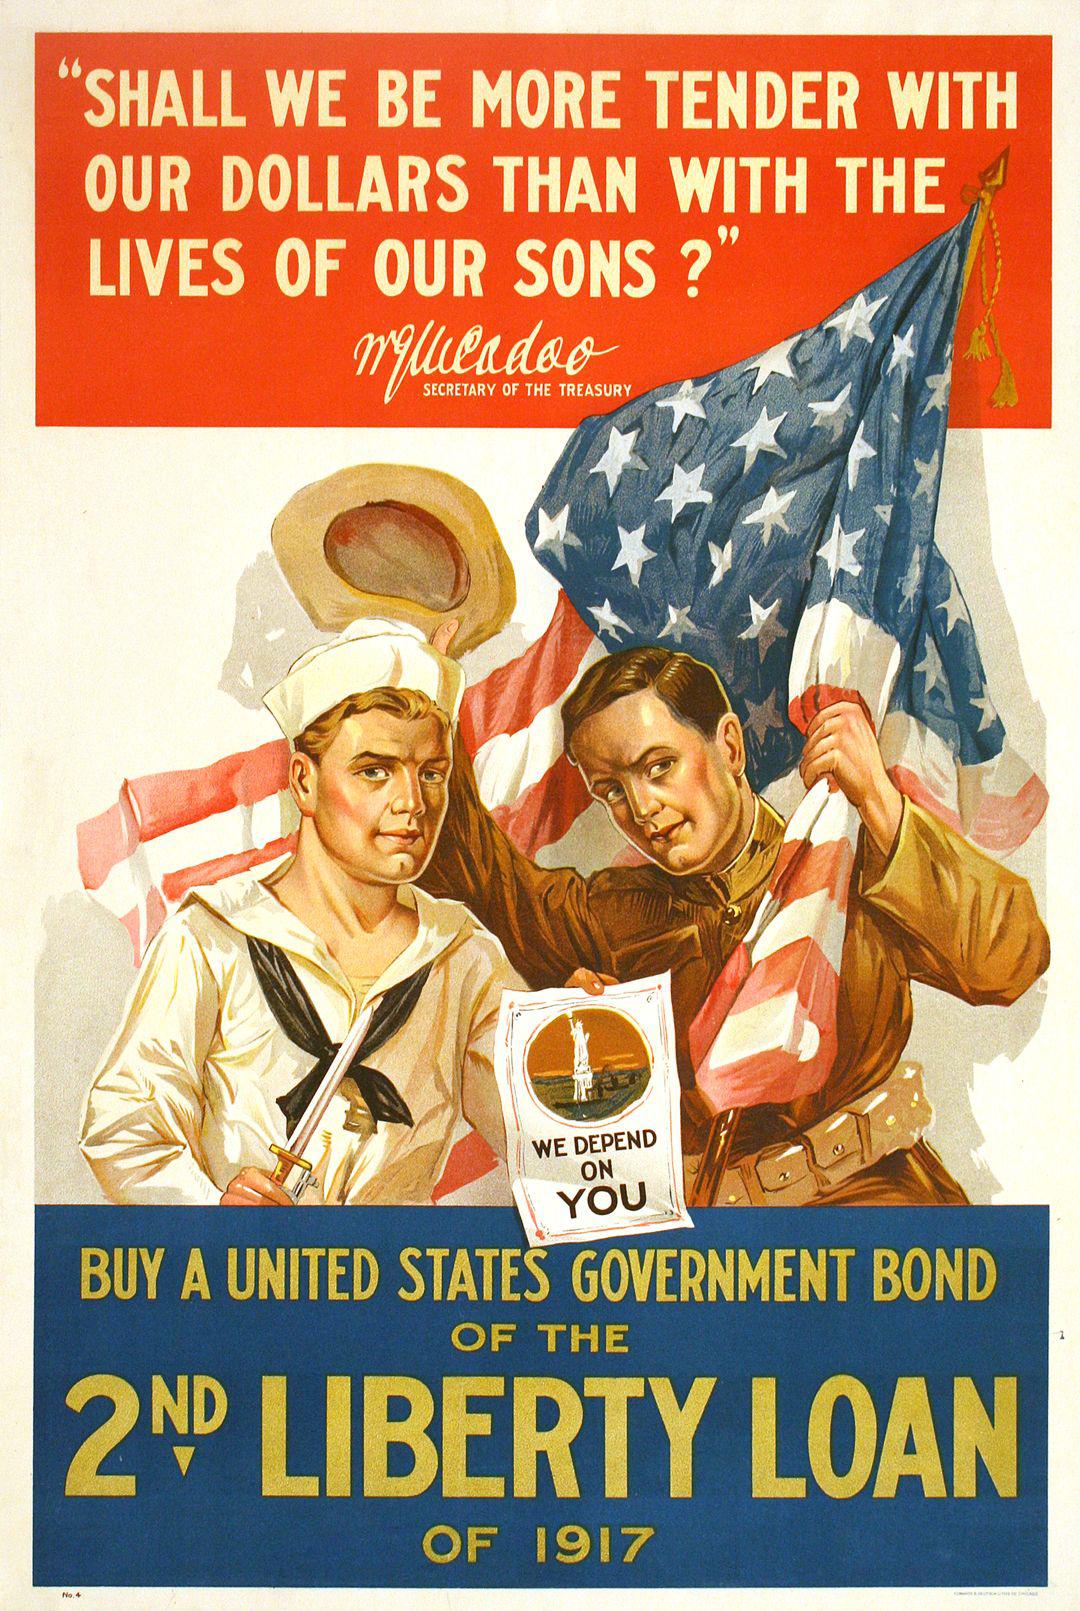 Original World War I Poster - Shall We Be More Tender With Our Dollars? 2nd Liberty Loan by William Gibbs 1917